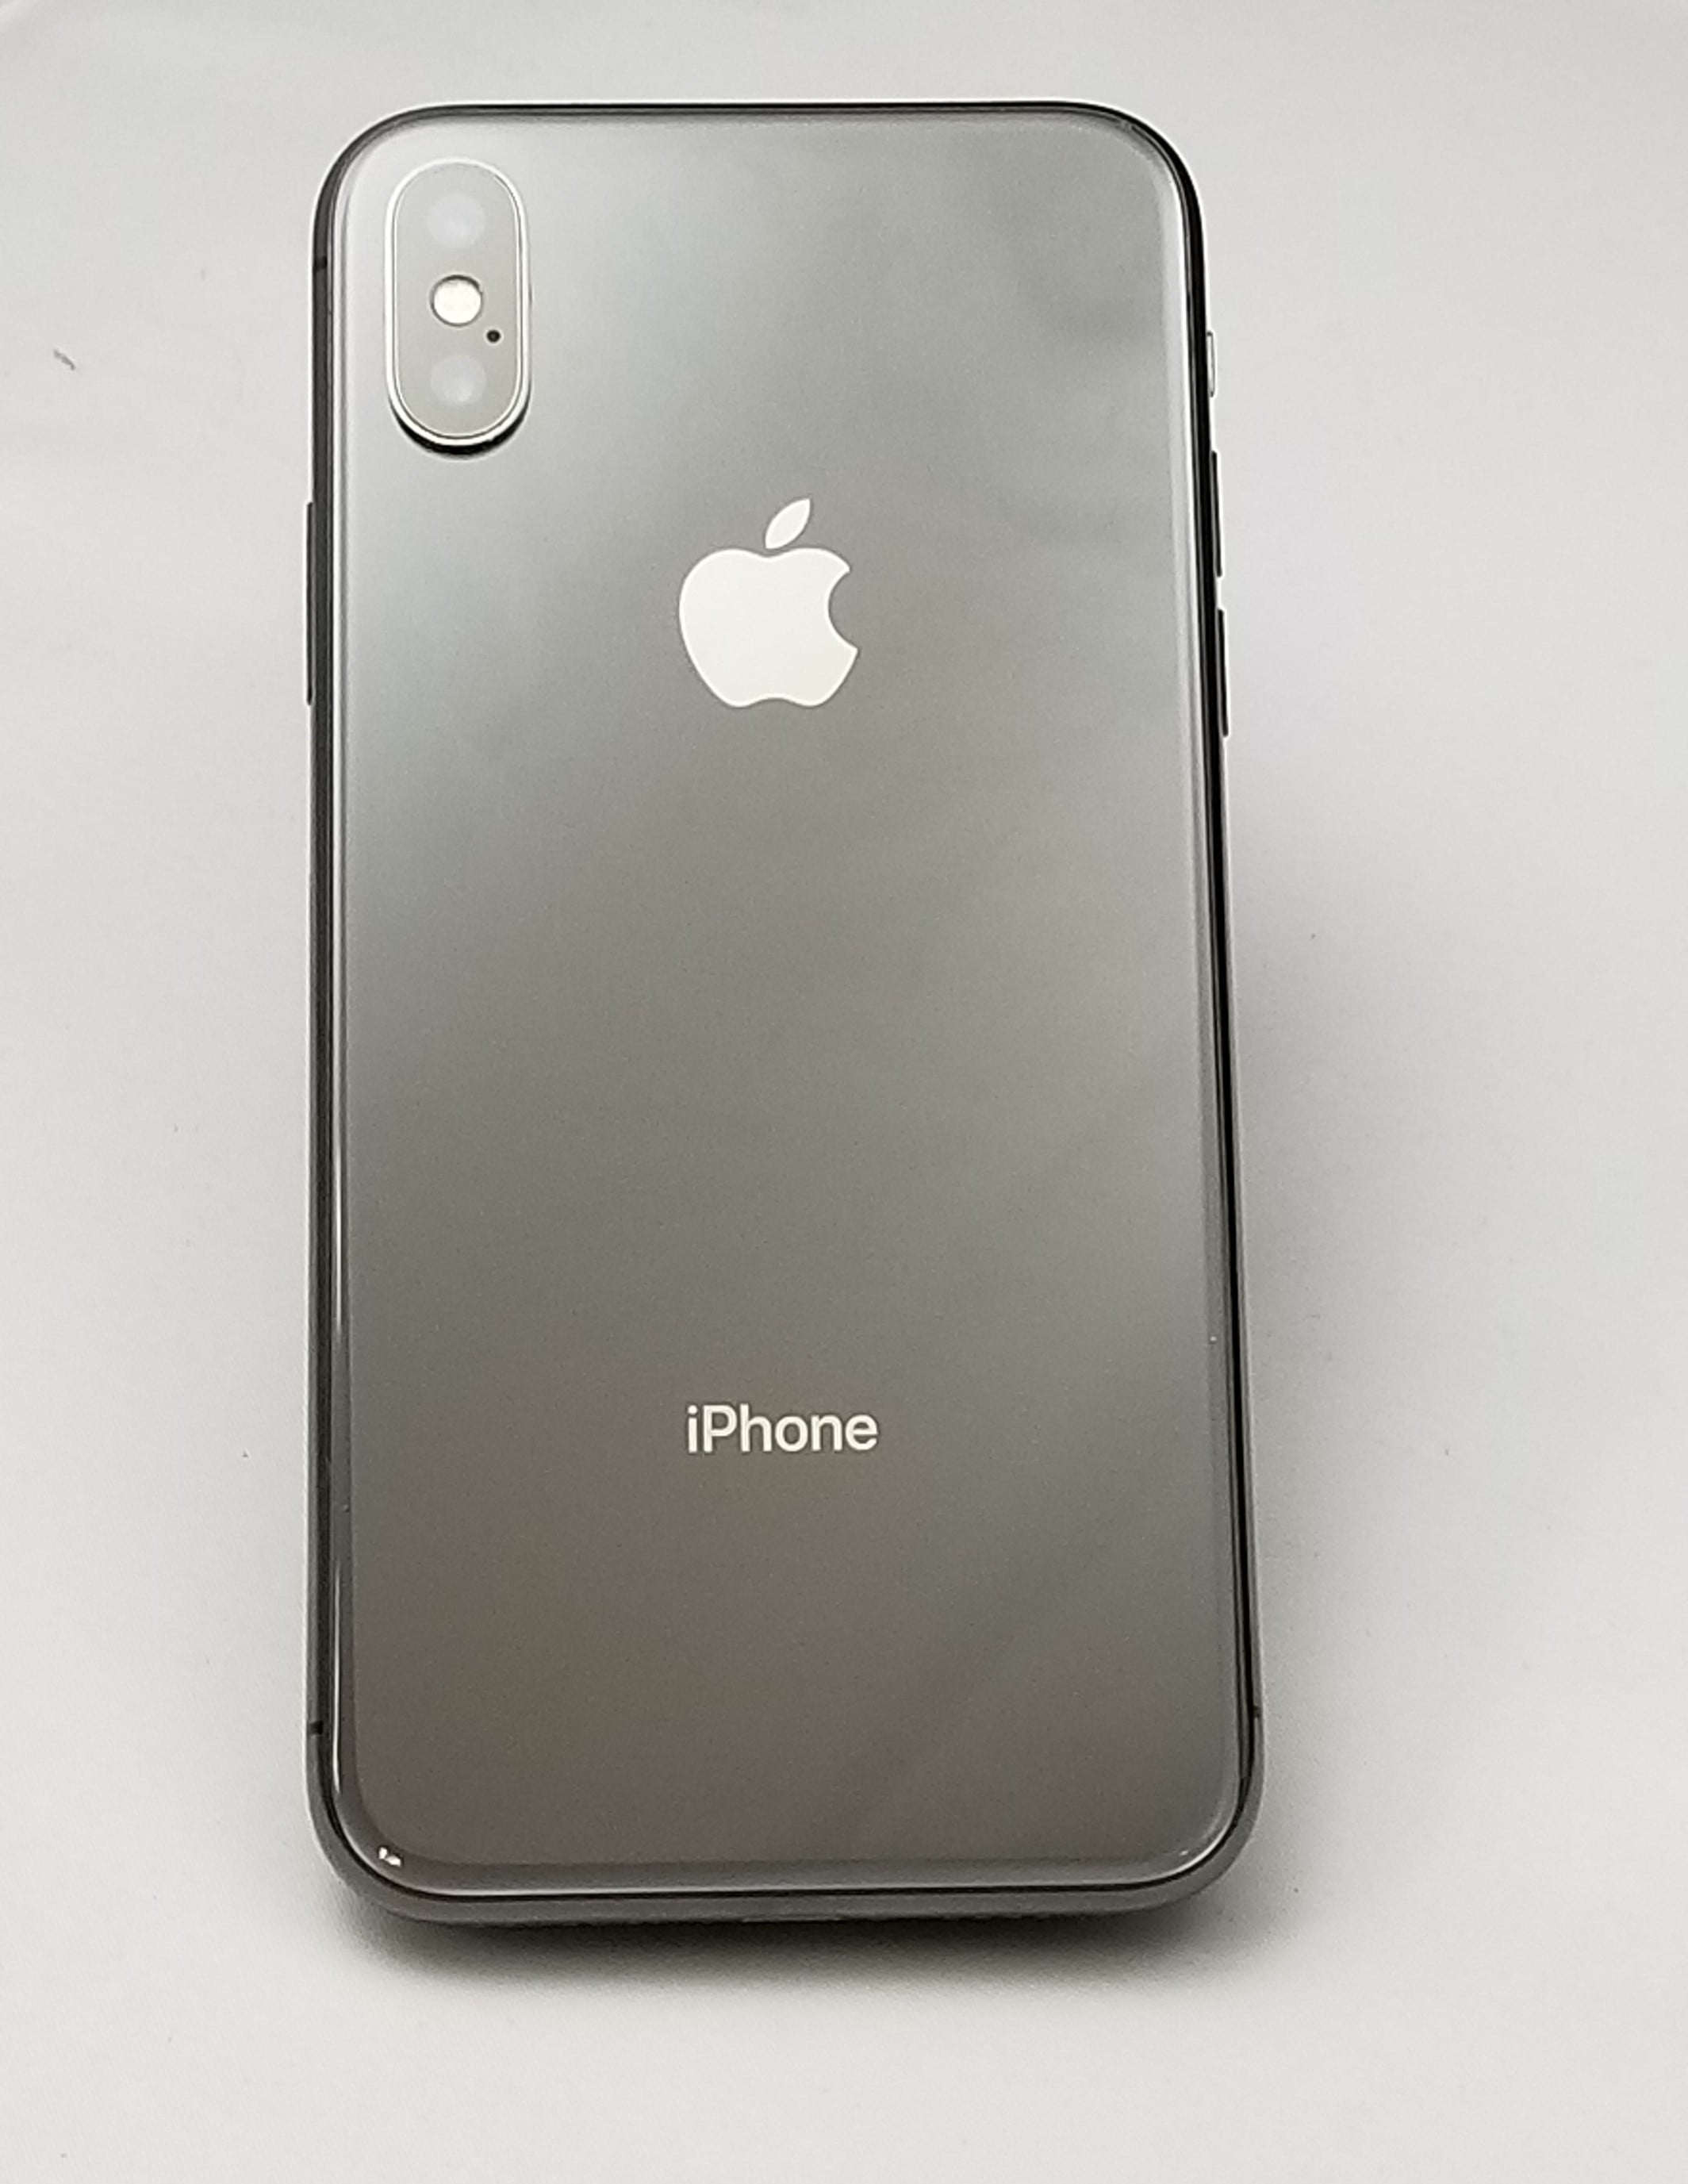 Apple iPhone X - 64GB - Space Gray (Unlocked) A1865 (CDMA + GSM) for sale  online